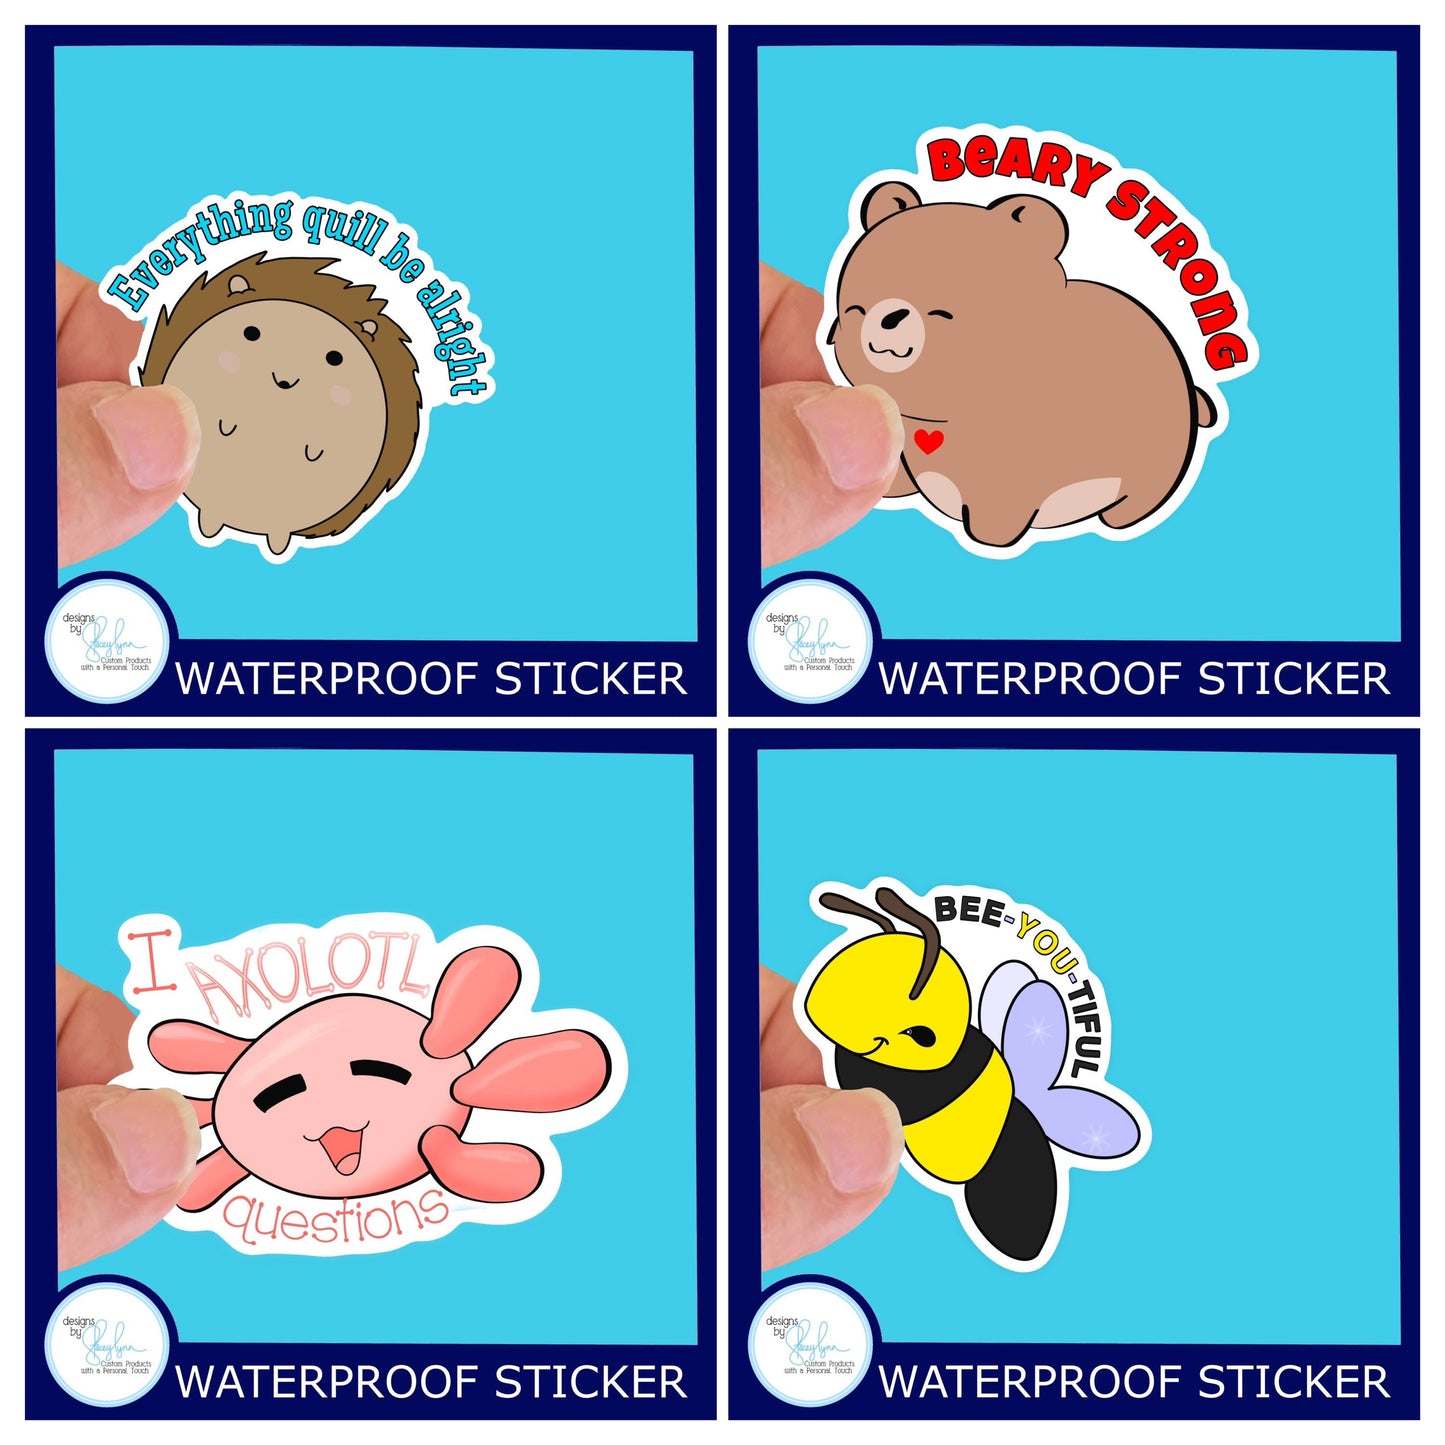 Hedgehog Everything quill be alright Waterproof Sticker, Water Bottle decal, Laptop sticker, animal Stickers,